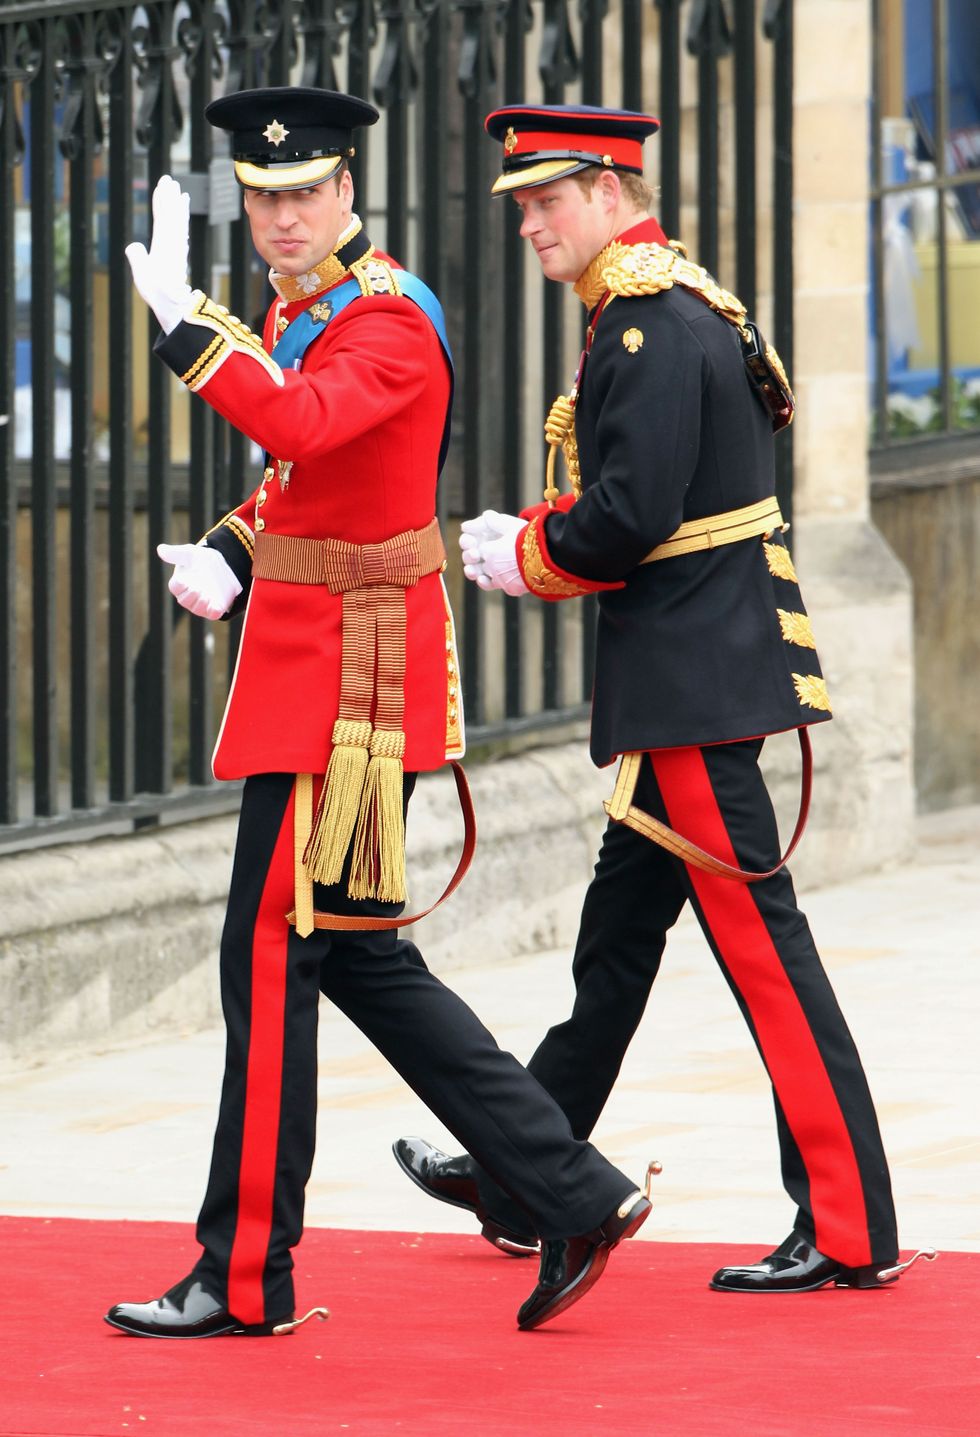 Prince William and Prince Harry at Prince William's wedding 2011